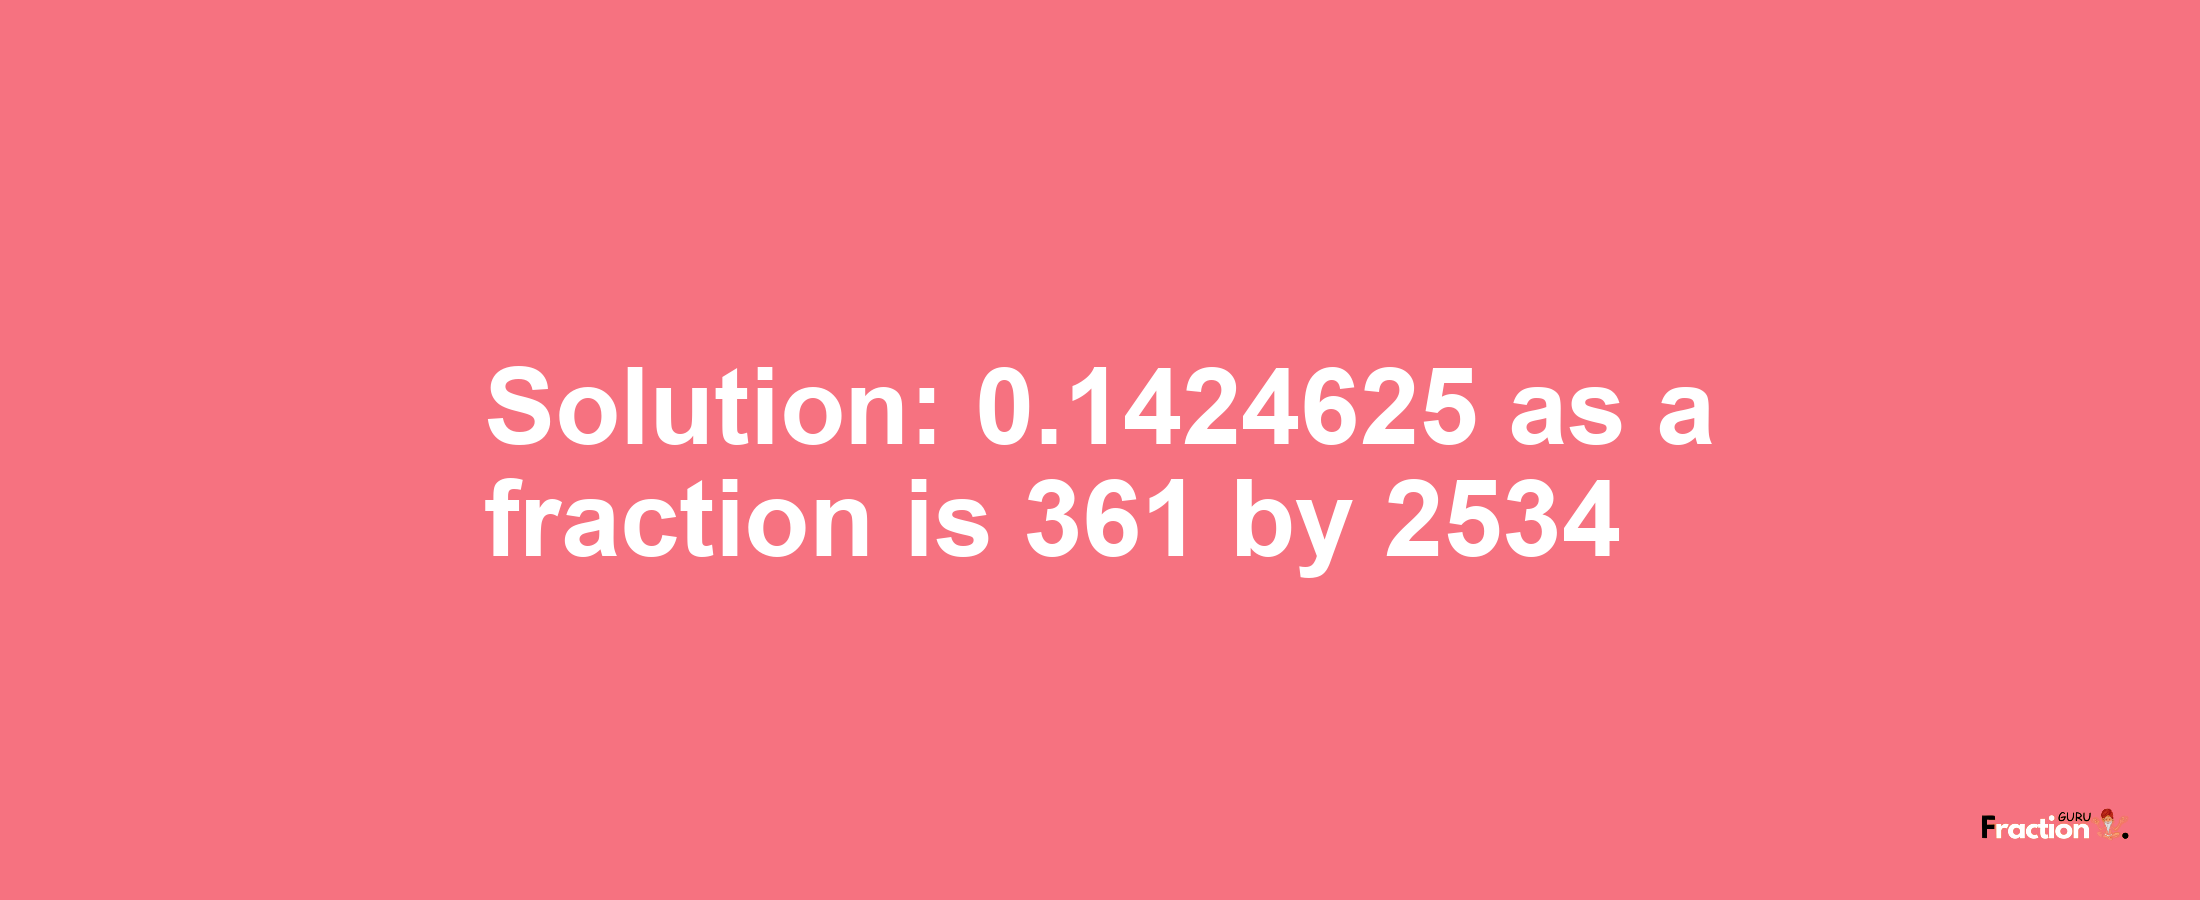 Solution:0.1424625 as a fraction is 361/2534